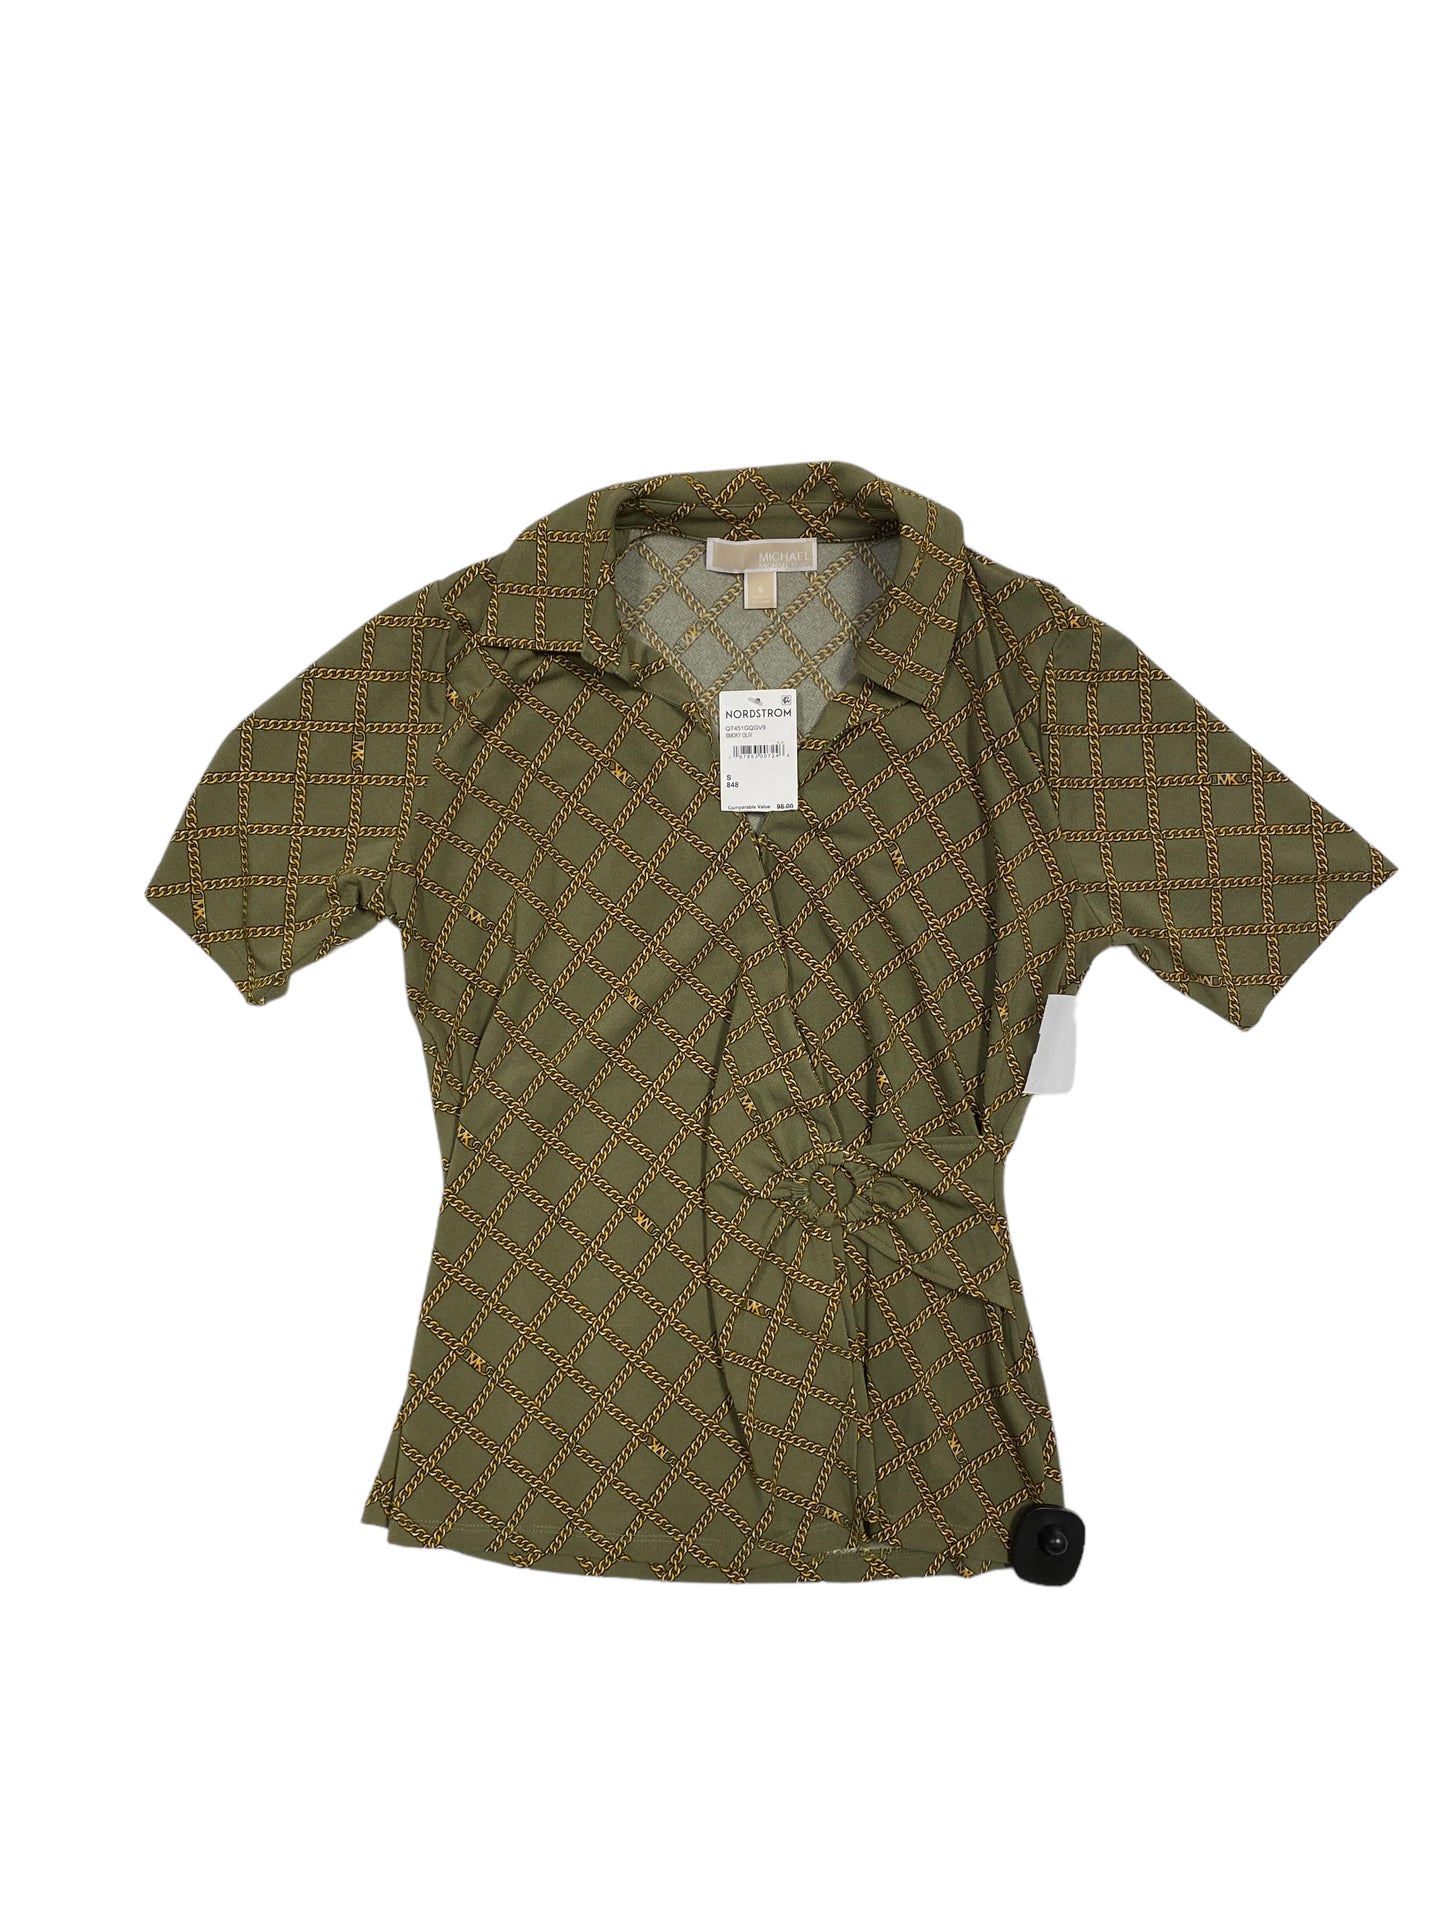 Green Top Short Sleeve Michael By Michael Kors, Size S